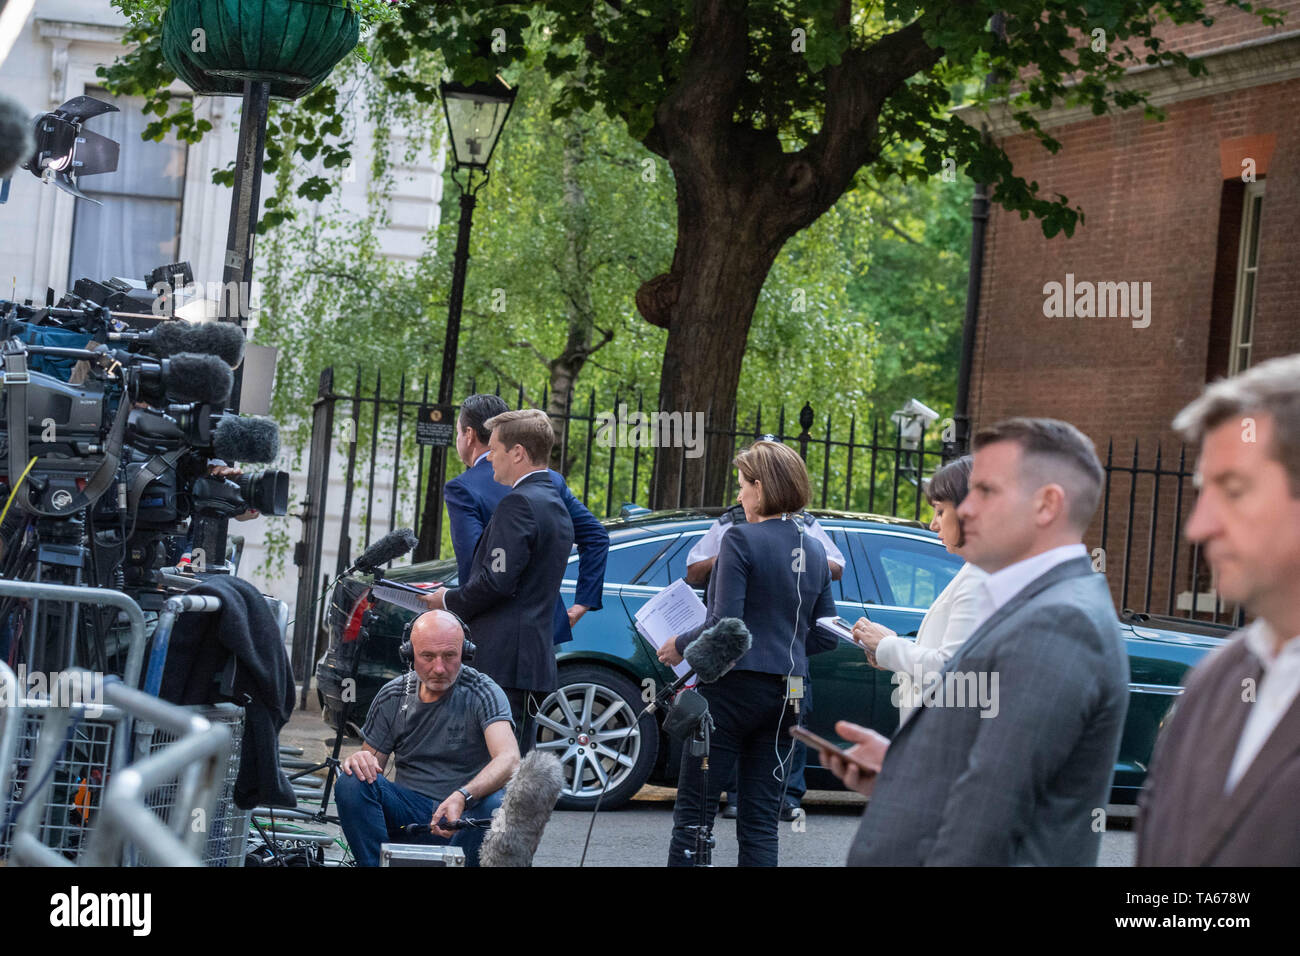 London 22nd May 2019,  More than twenty camera crews and commentators descended on Downing Street amid rumours of a resignation announcement by Theresa May MP PC, Prime Minister,  These rumours were subsequently denied by the Chief Whip.  Credit Ian Davidson/Alamy Live News Stock Photo